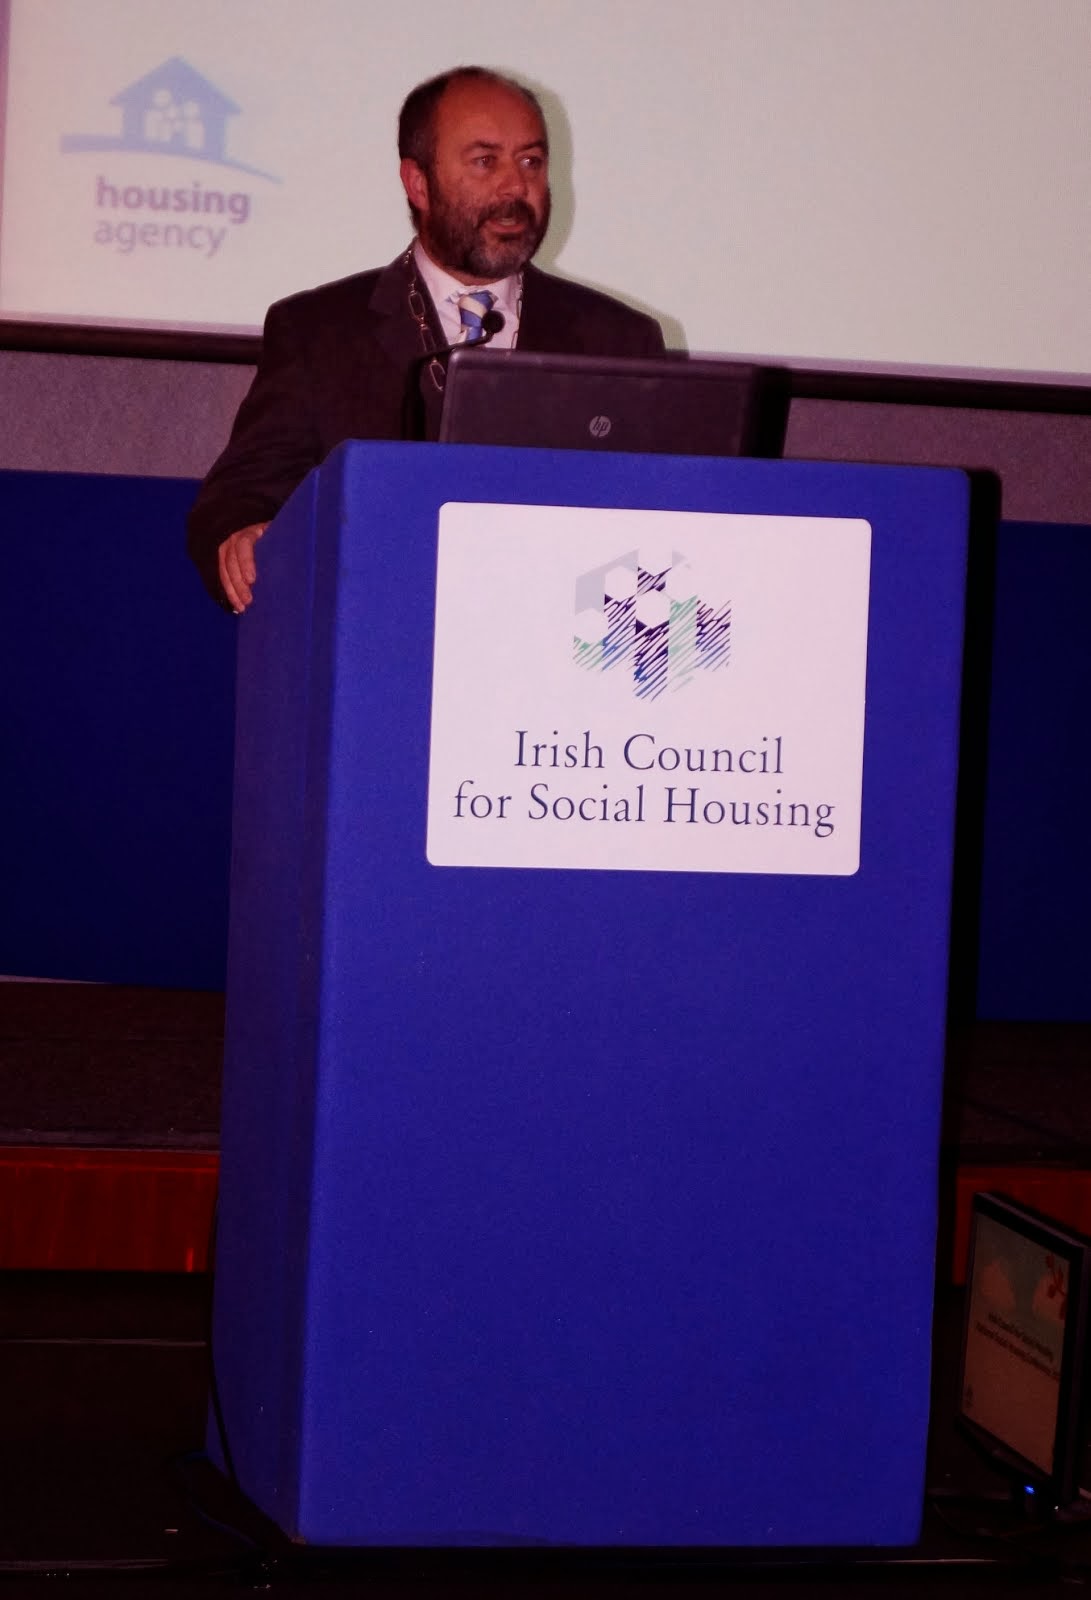 Speaking at the National Conference of Irish Council for Social Housing